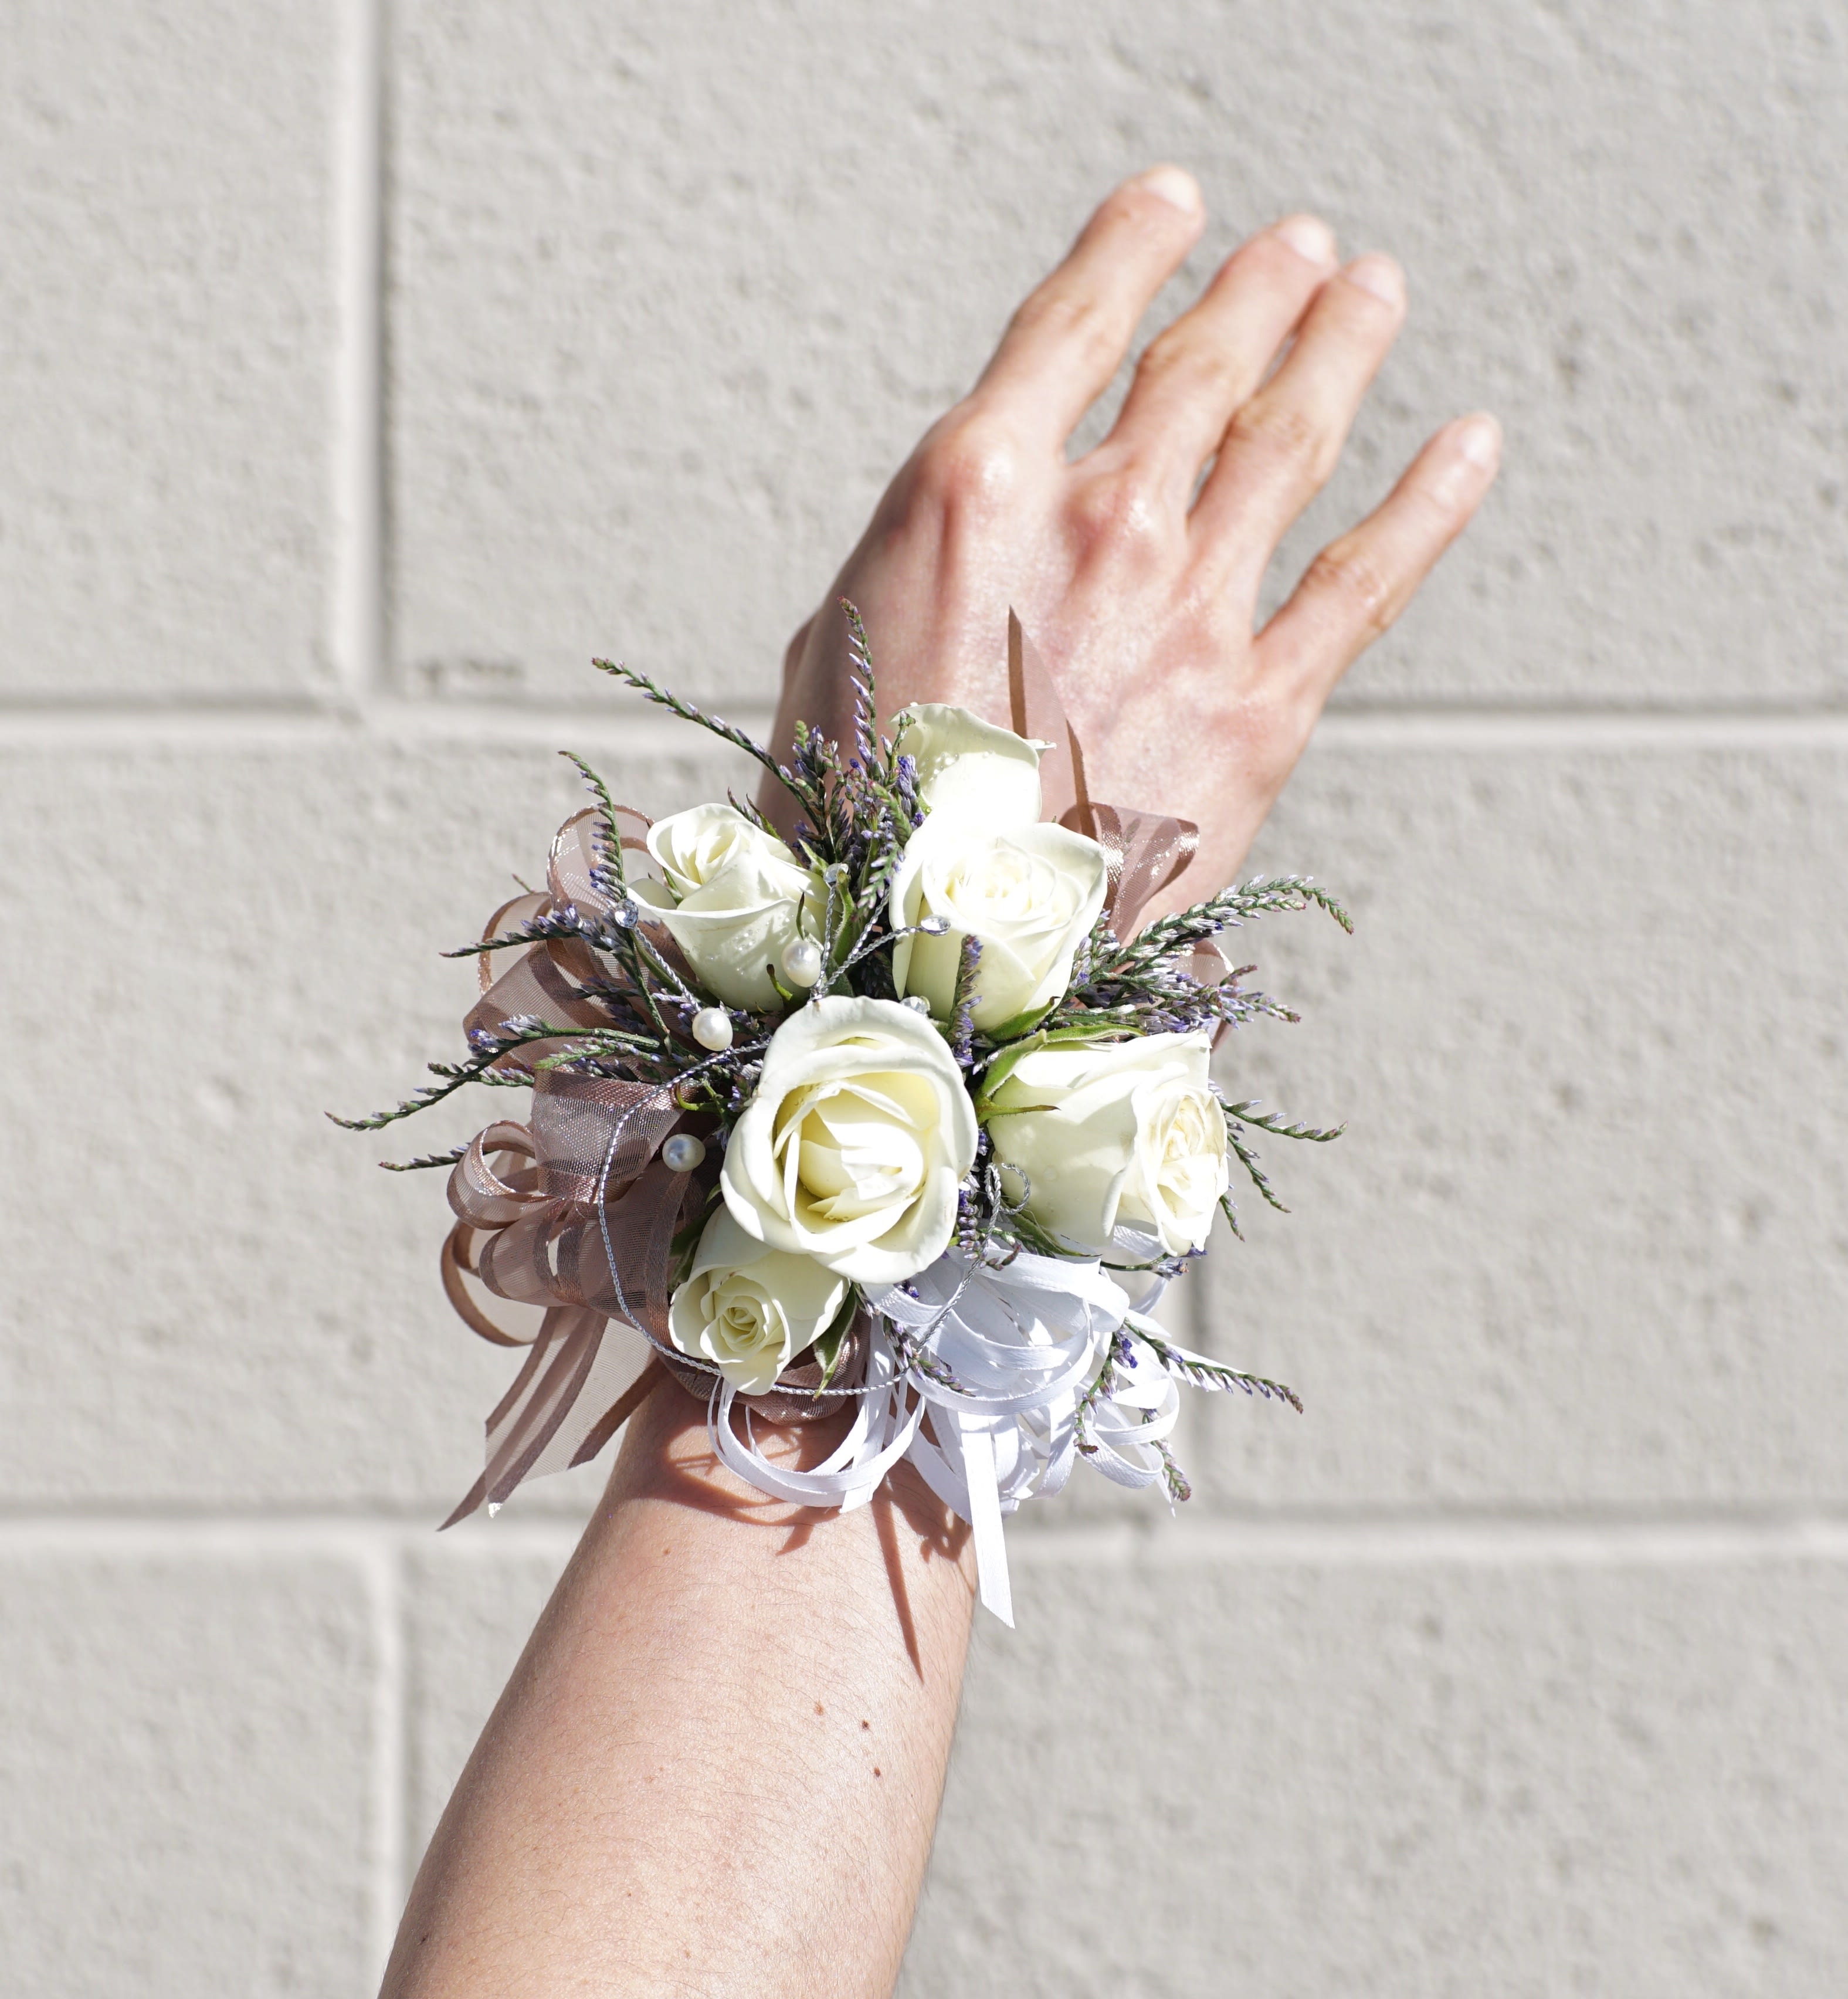 Wrist Corsage 5 - Wrist corsage with white roses and accents. CUSTOMER CAN CHOOSE ANY COLOR STANDARD: WRIST CORSAGE DELUXE: WRIST CORSAGE + BOUTONNIERE